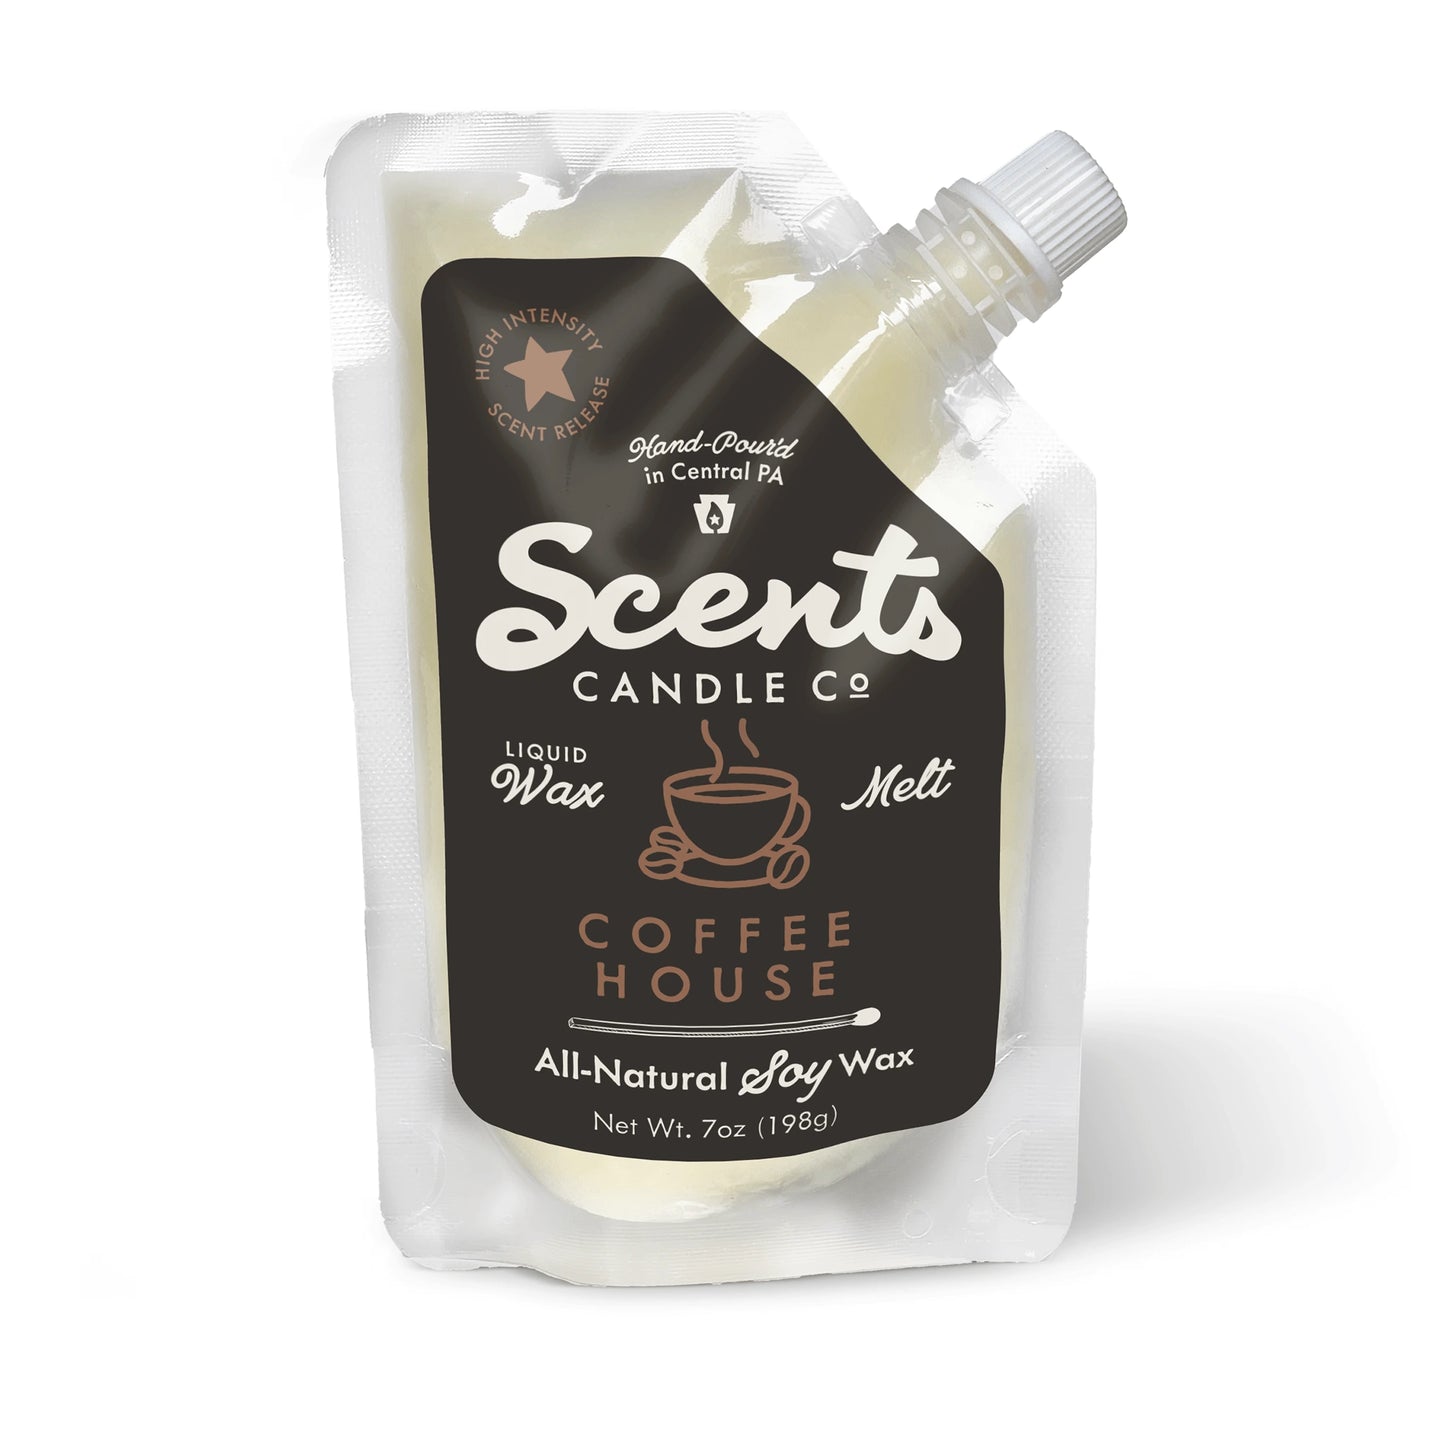 Scents Candle Co. Coffee House Liquid Wax Melt